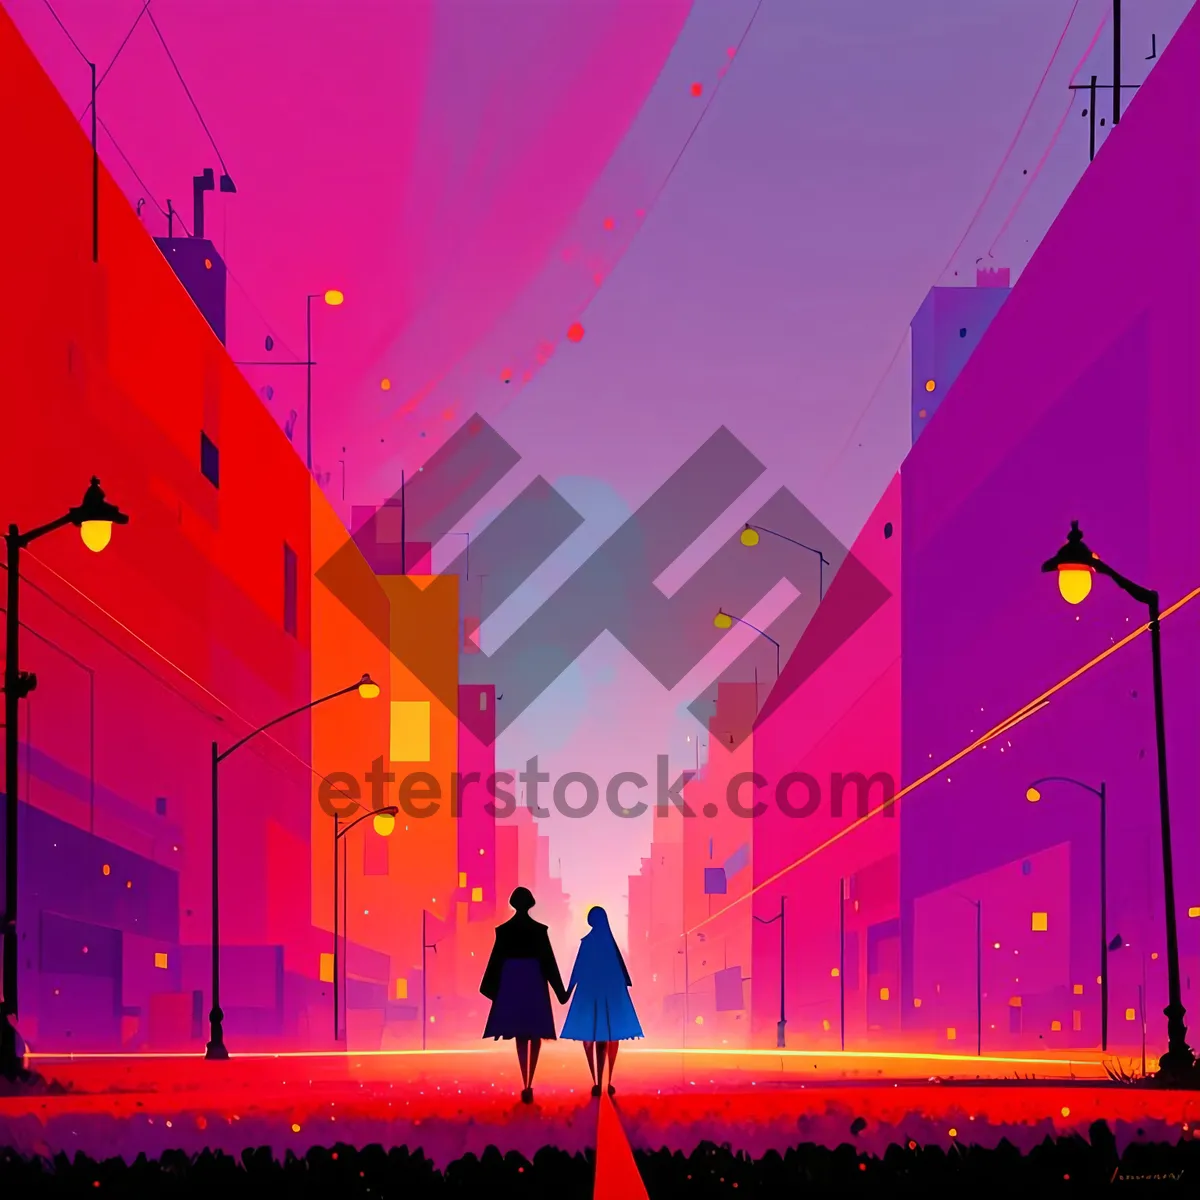 Picture of Vibrant Sunset Sky with Electricity Tower Silhouette